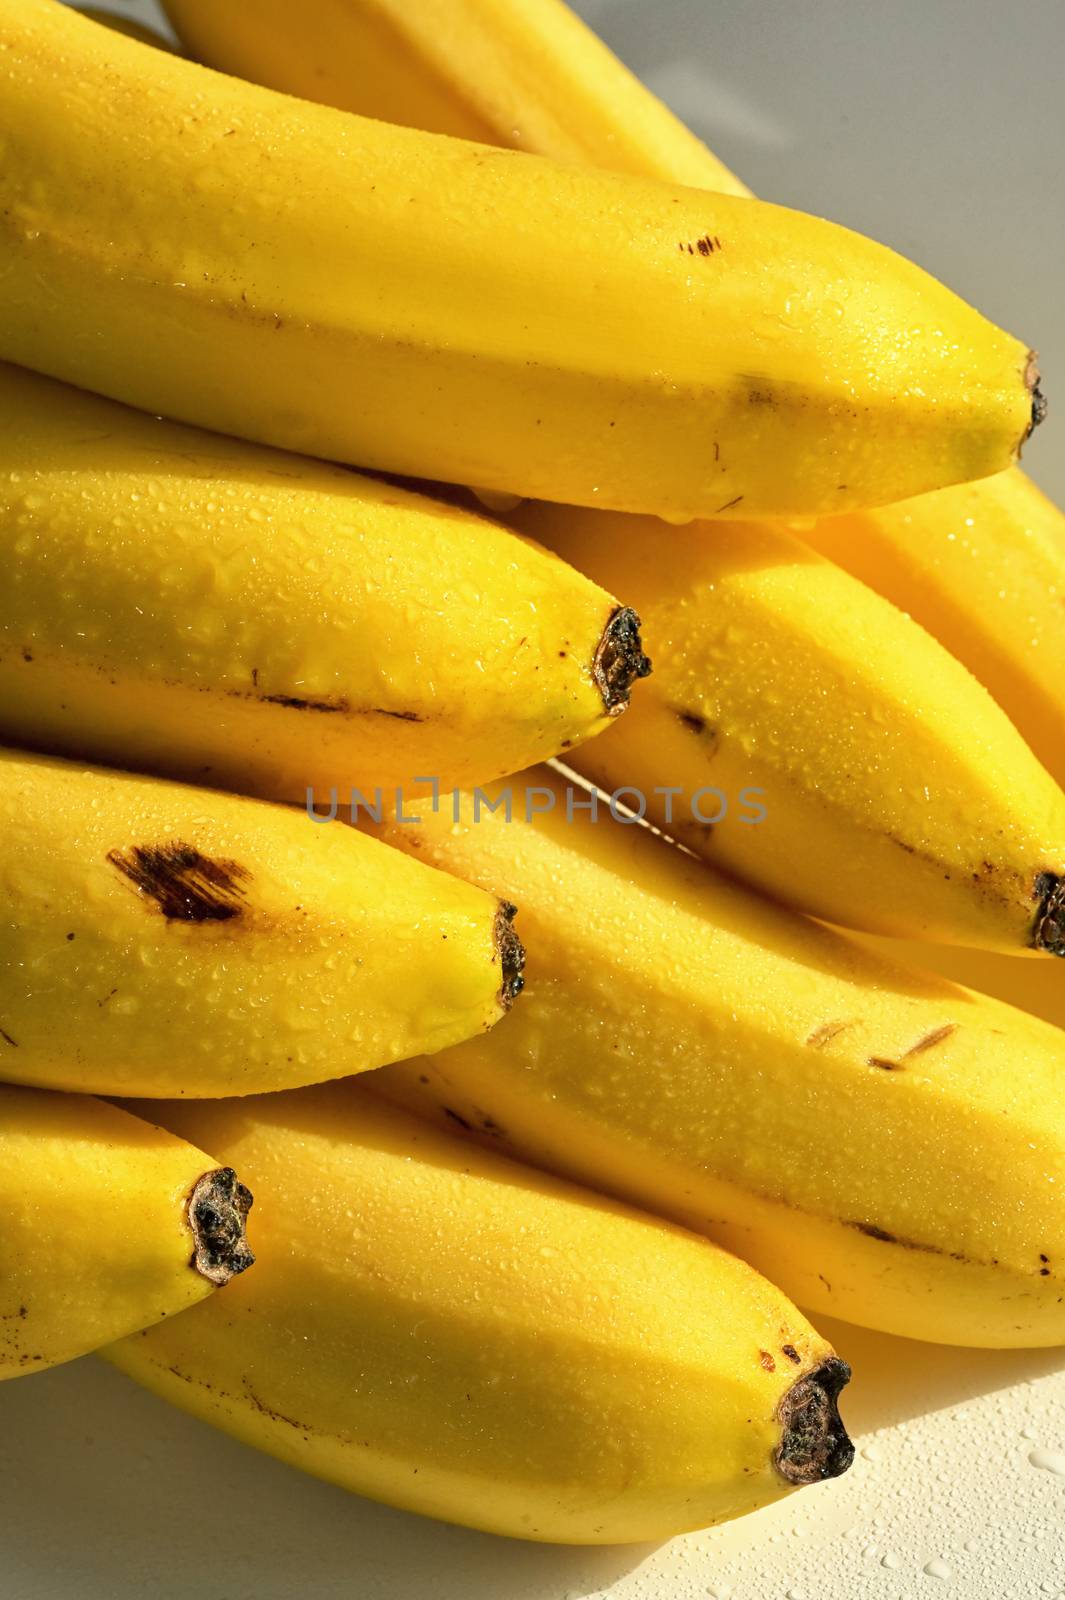 Bunch of raw ripe yellow bananas by mady70